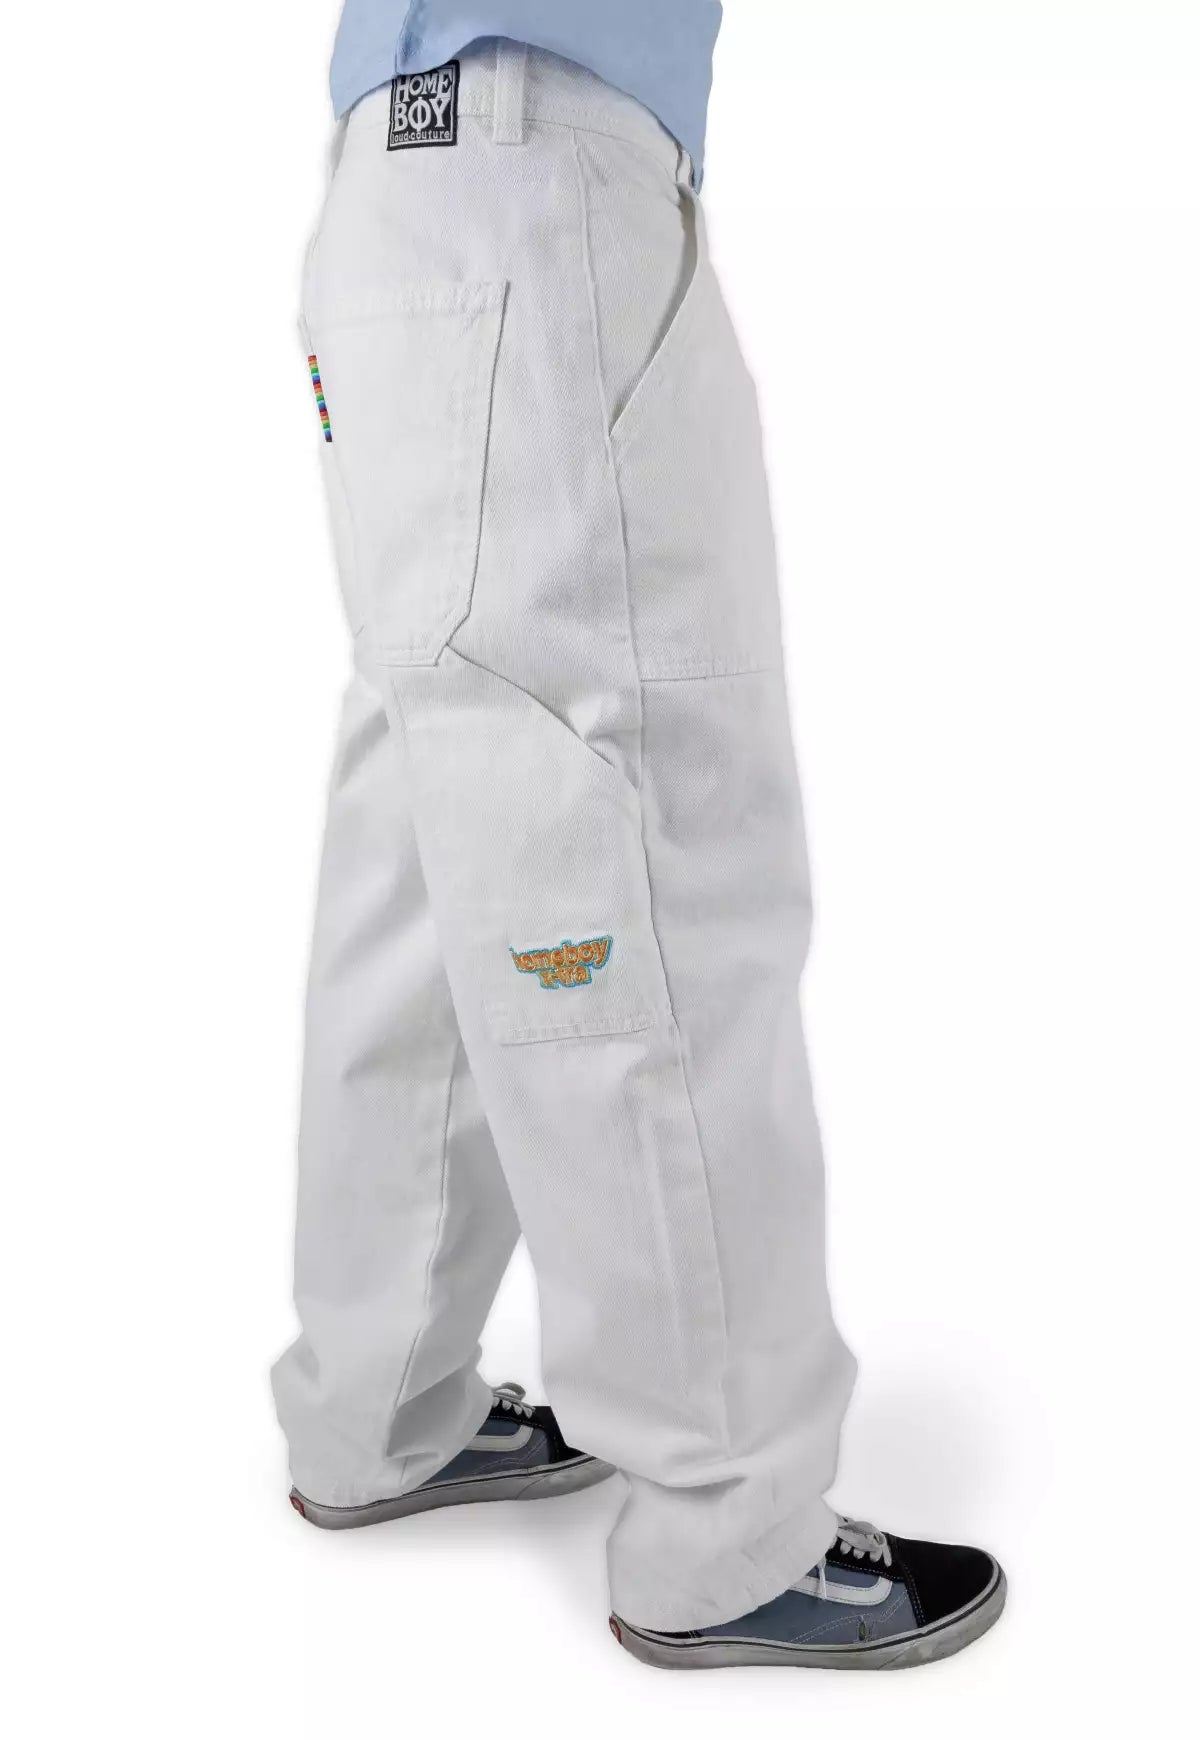 HOMEBOY - X-TRA WORK PANTS - OFF WHITE